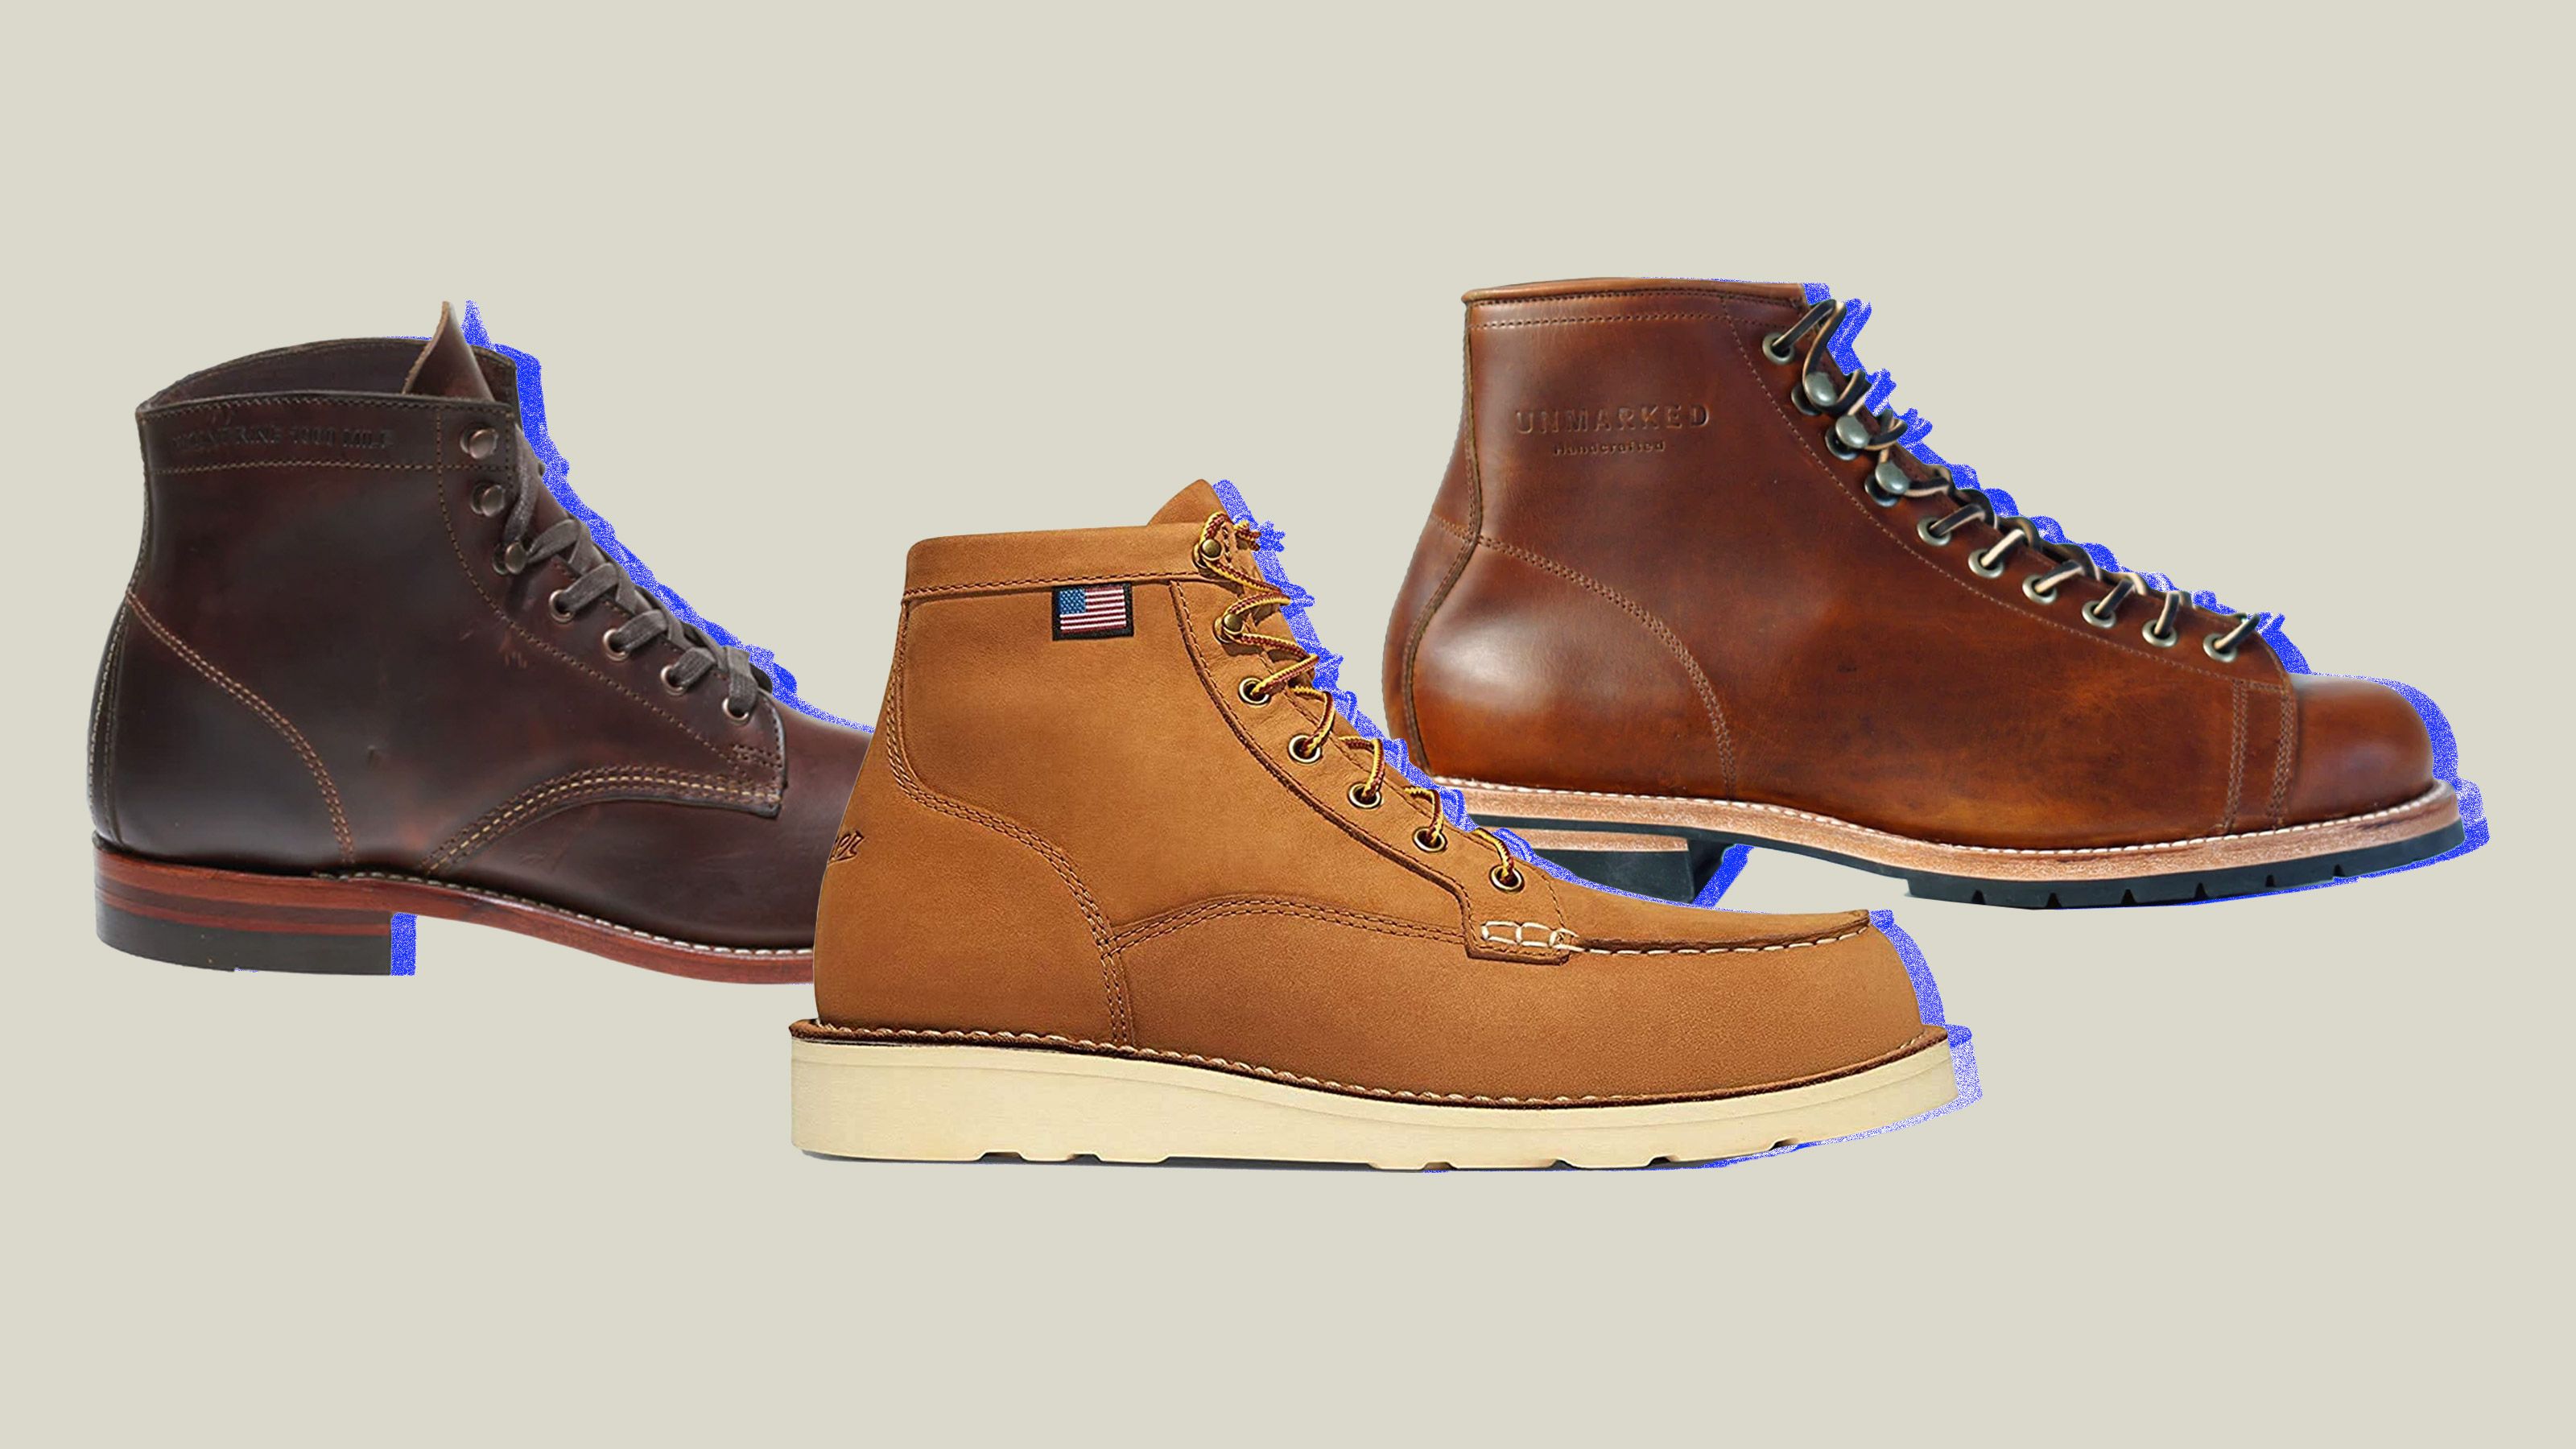 The Best Work Boots You Can Buy